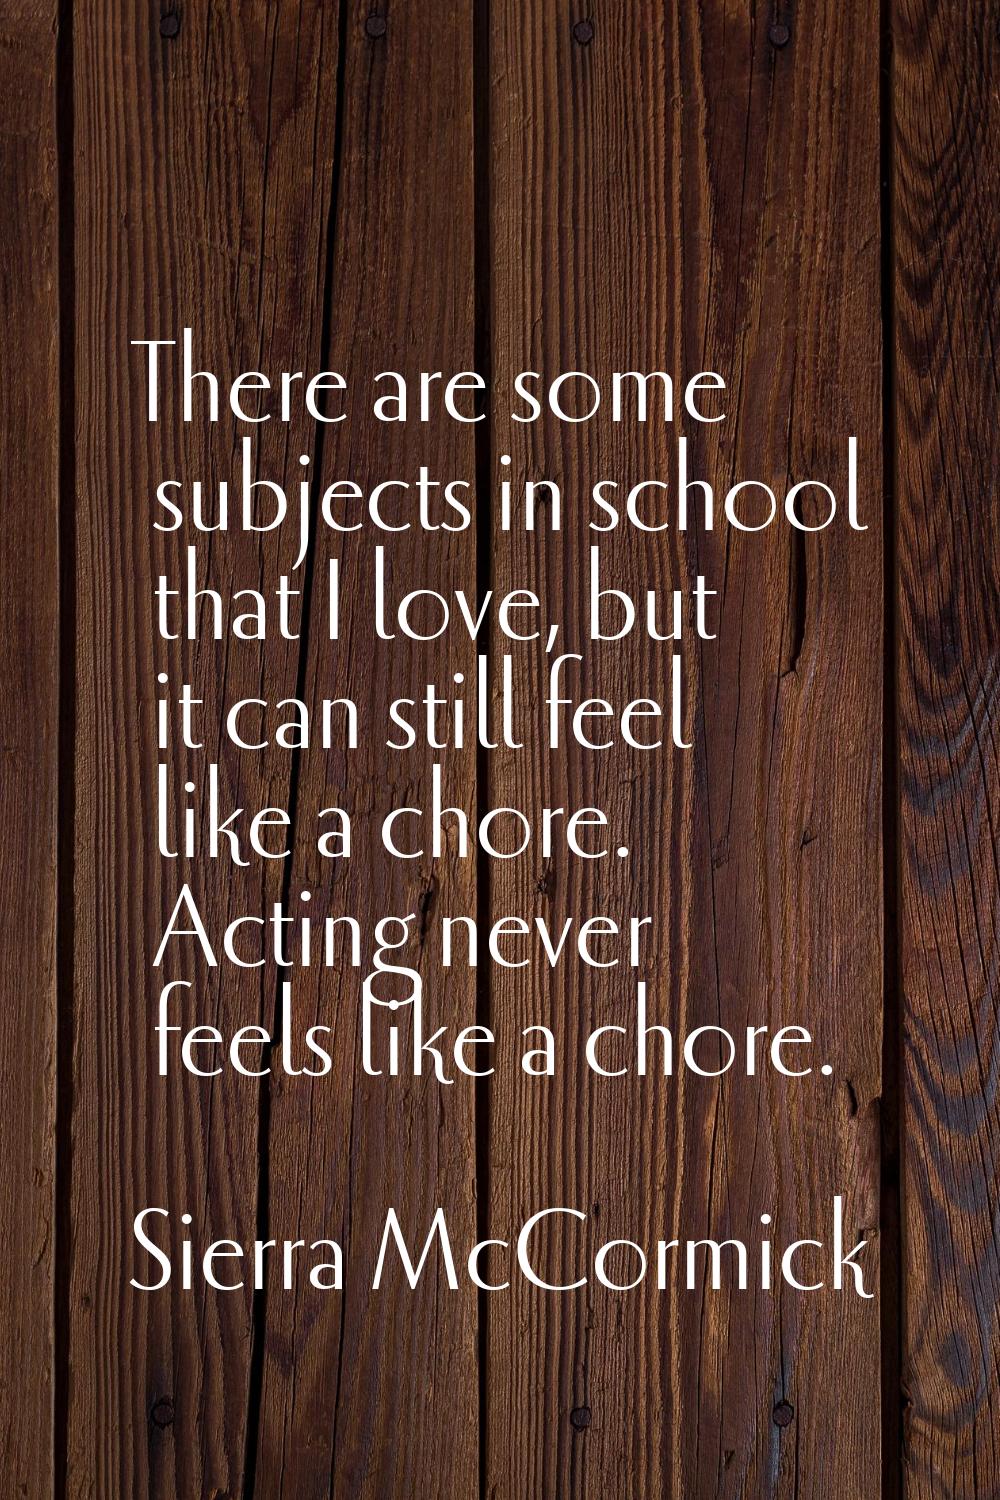 There are some subjects in school that I love, but it can still feel like a chore. Acting never fee